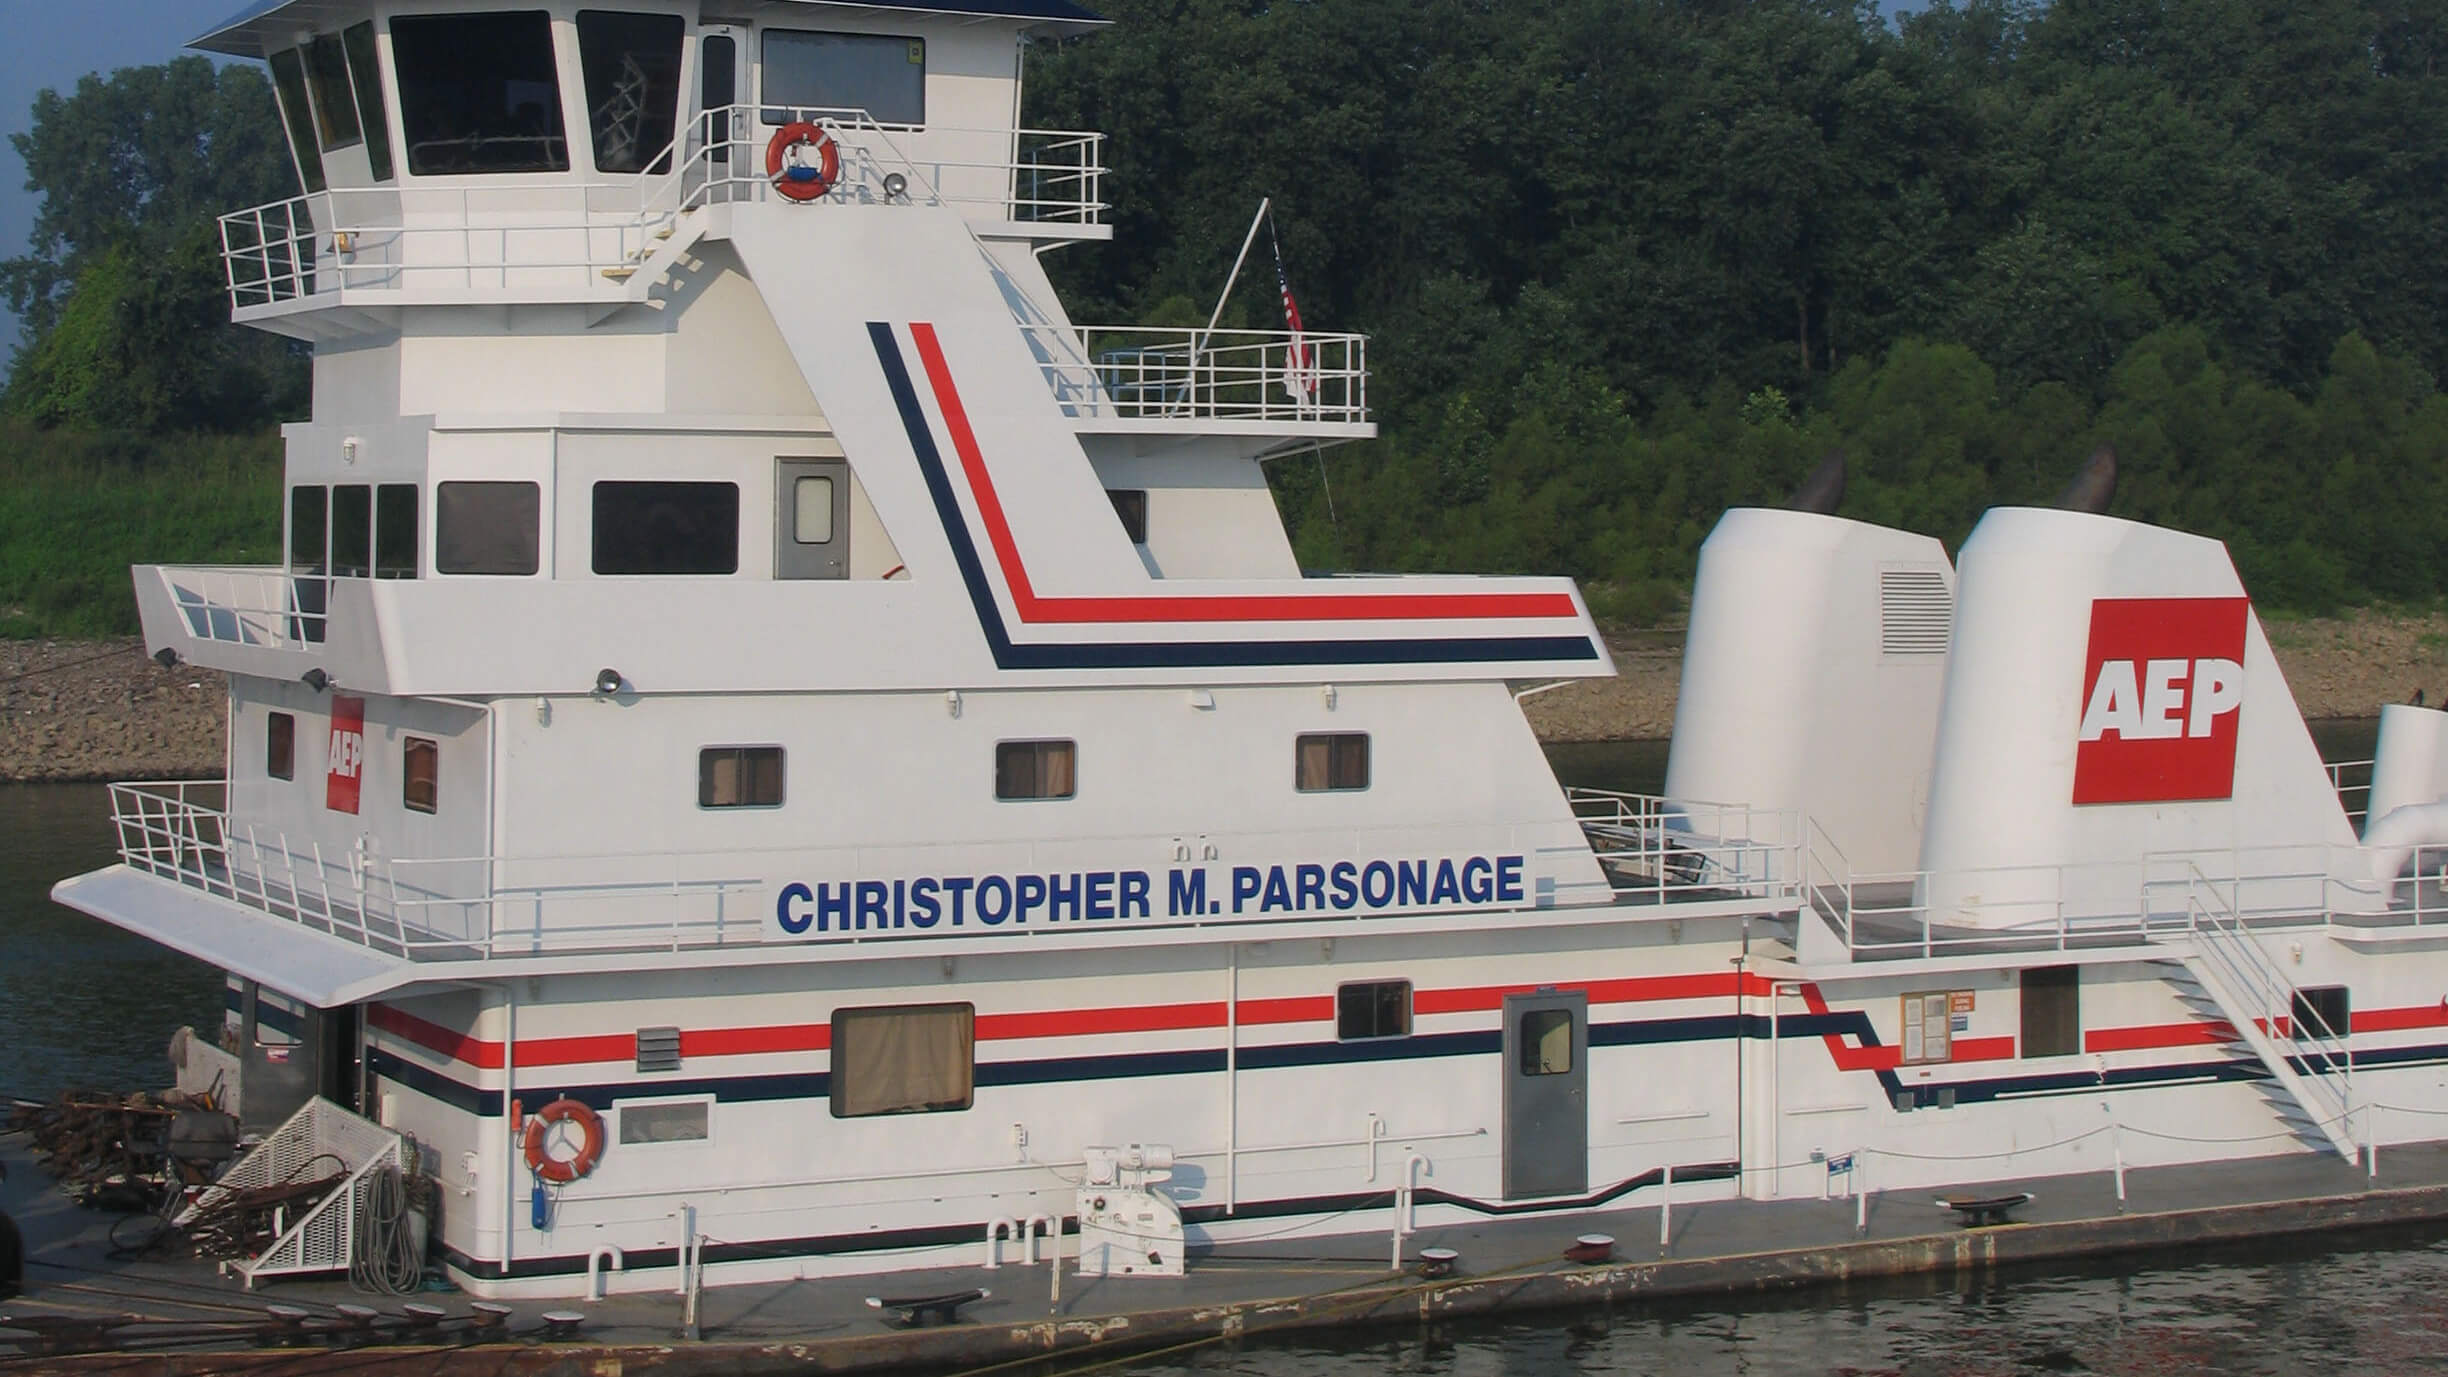 Christopher M. Parsonage towboat equipped with BAE Systems generator